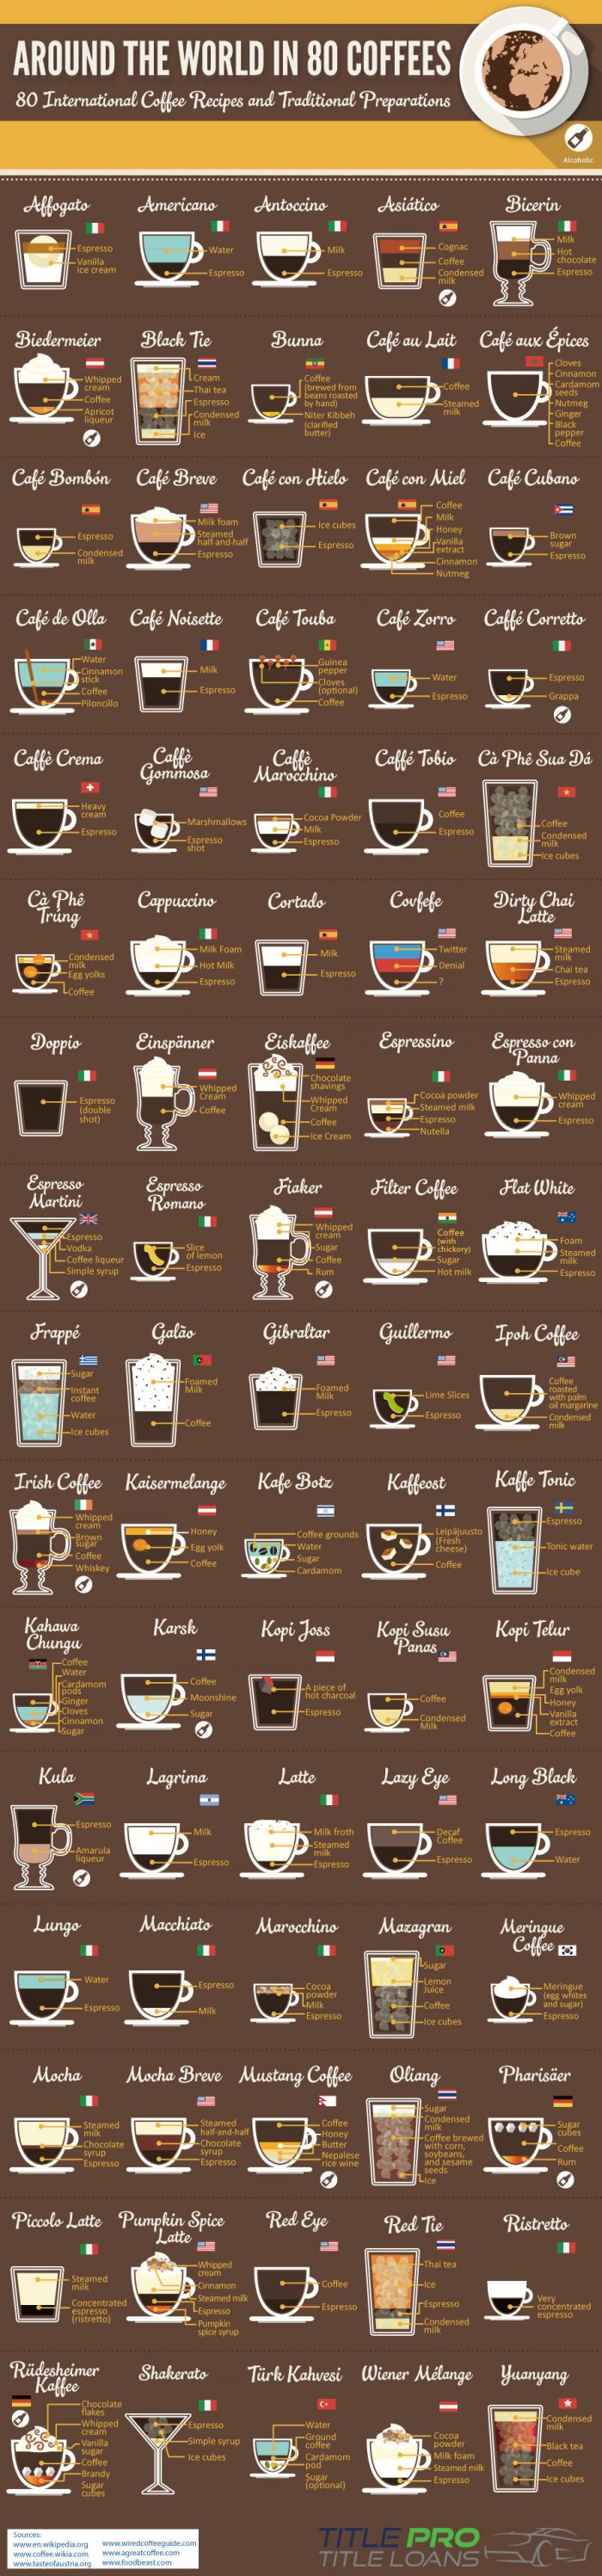 Coffee Recipes From Around The World